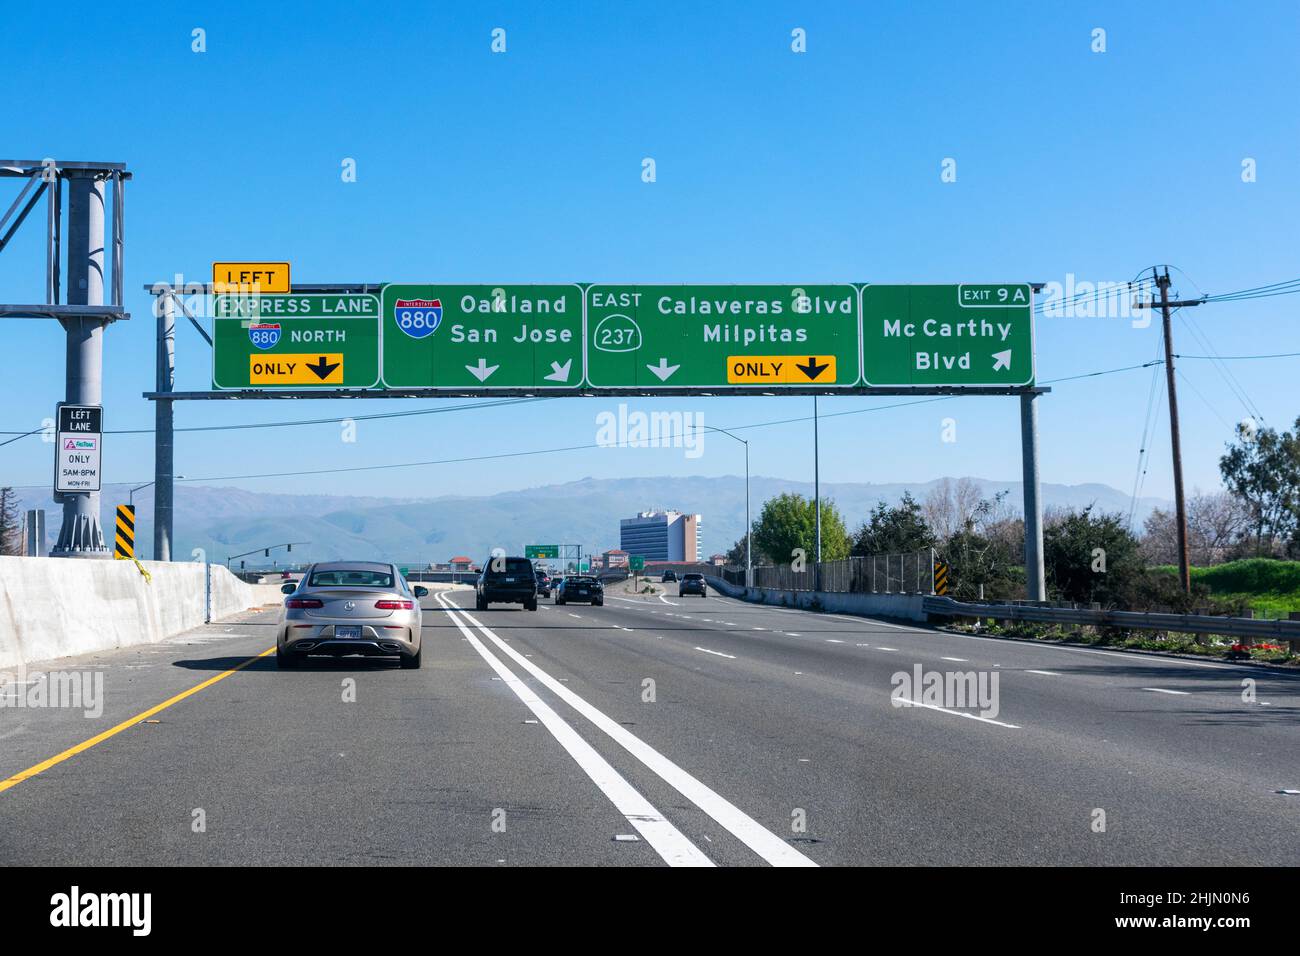 Light traffic on eastbound highway 237. Interstate 880 overhead highway road sign showing drivers the directions to Oakland and San Jose. Express lane Stock Photo